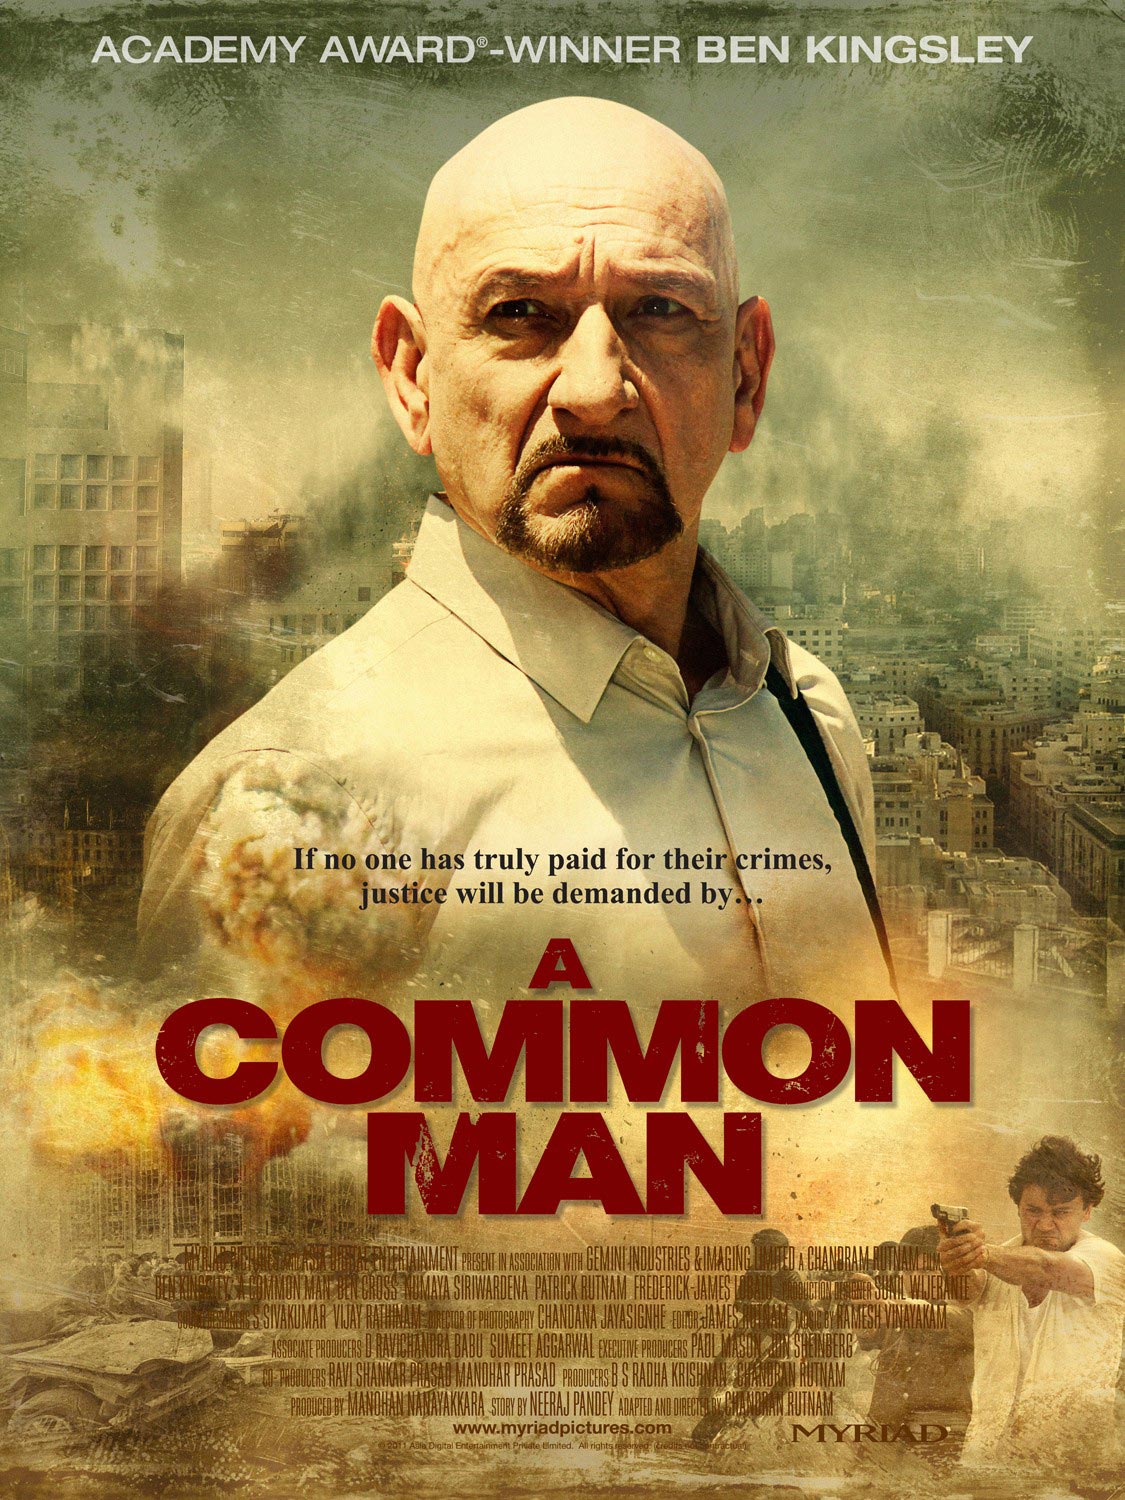 A COMMON MAN POster